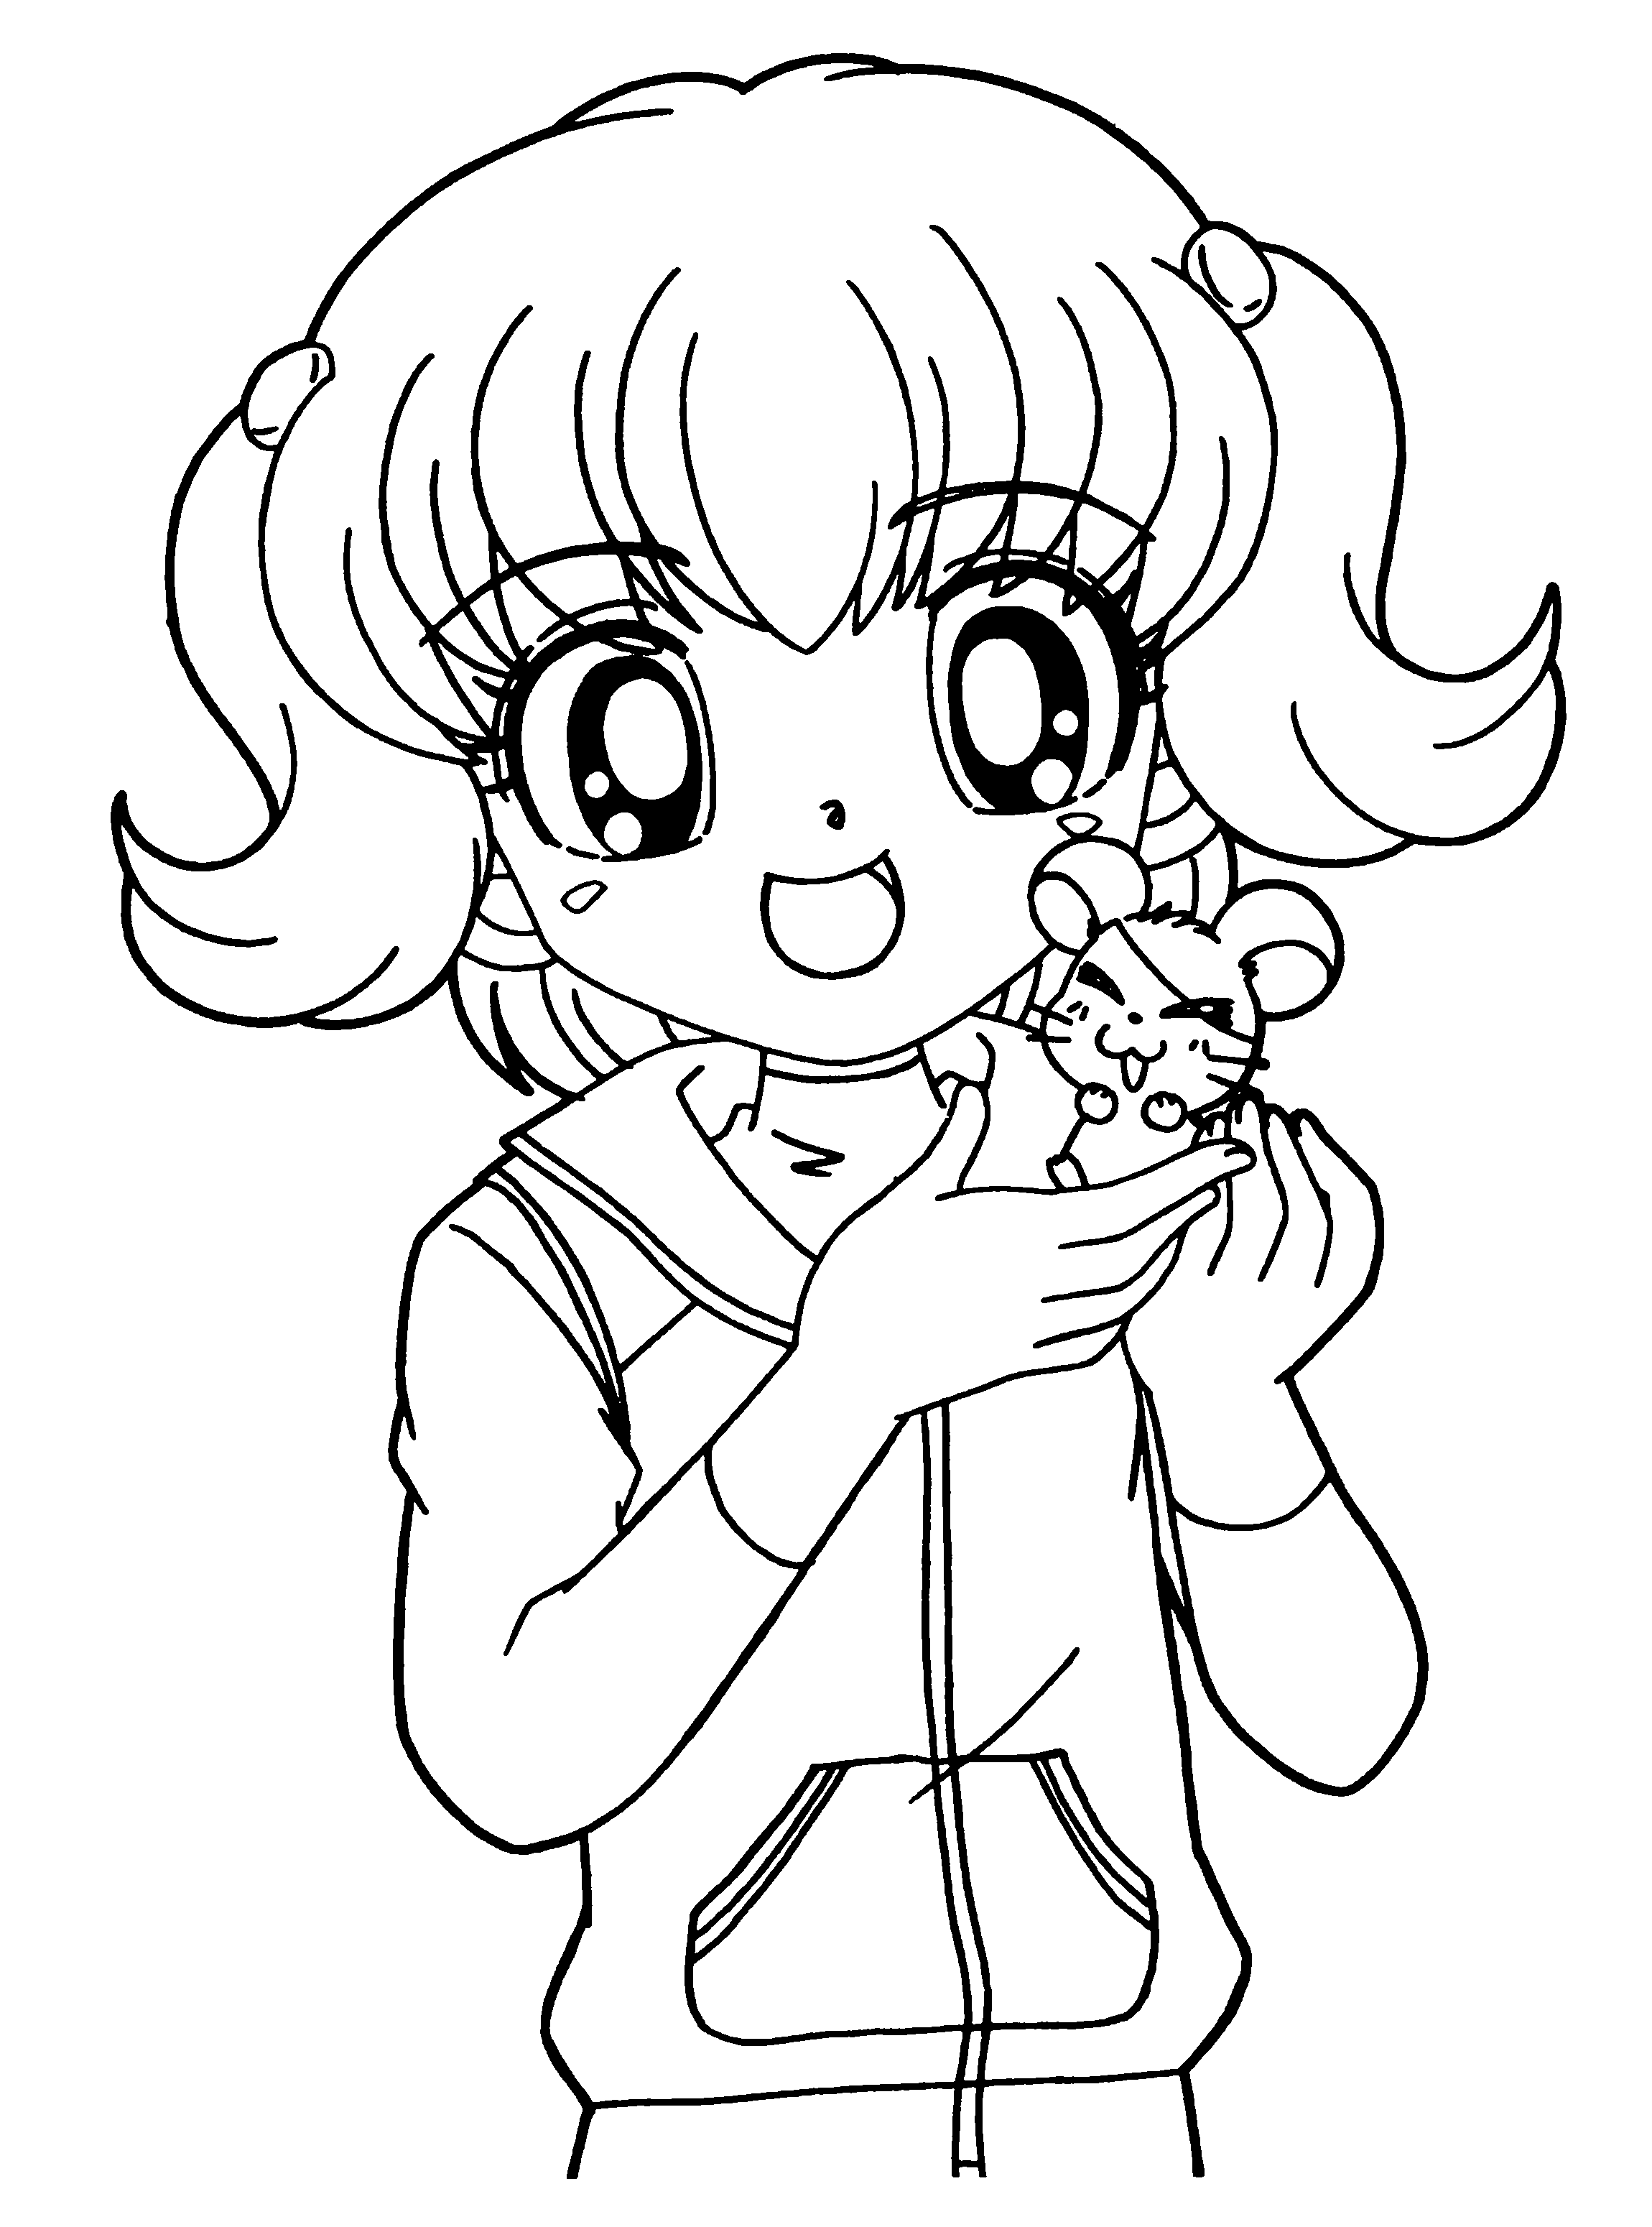 Cute Anime Animals Coloring Pages - High Quality Coloring Pages